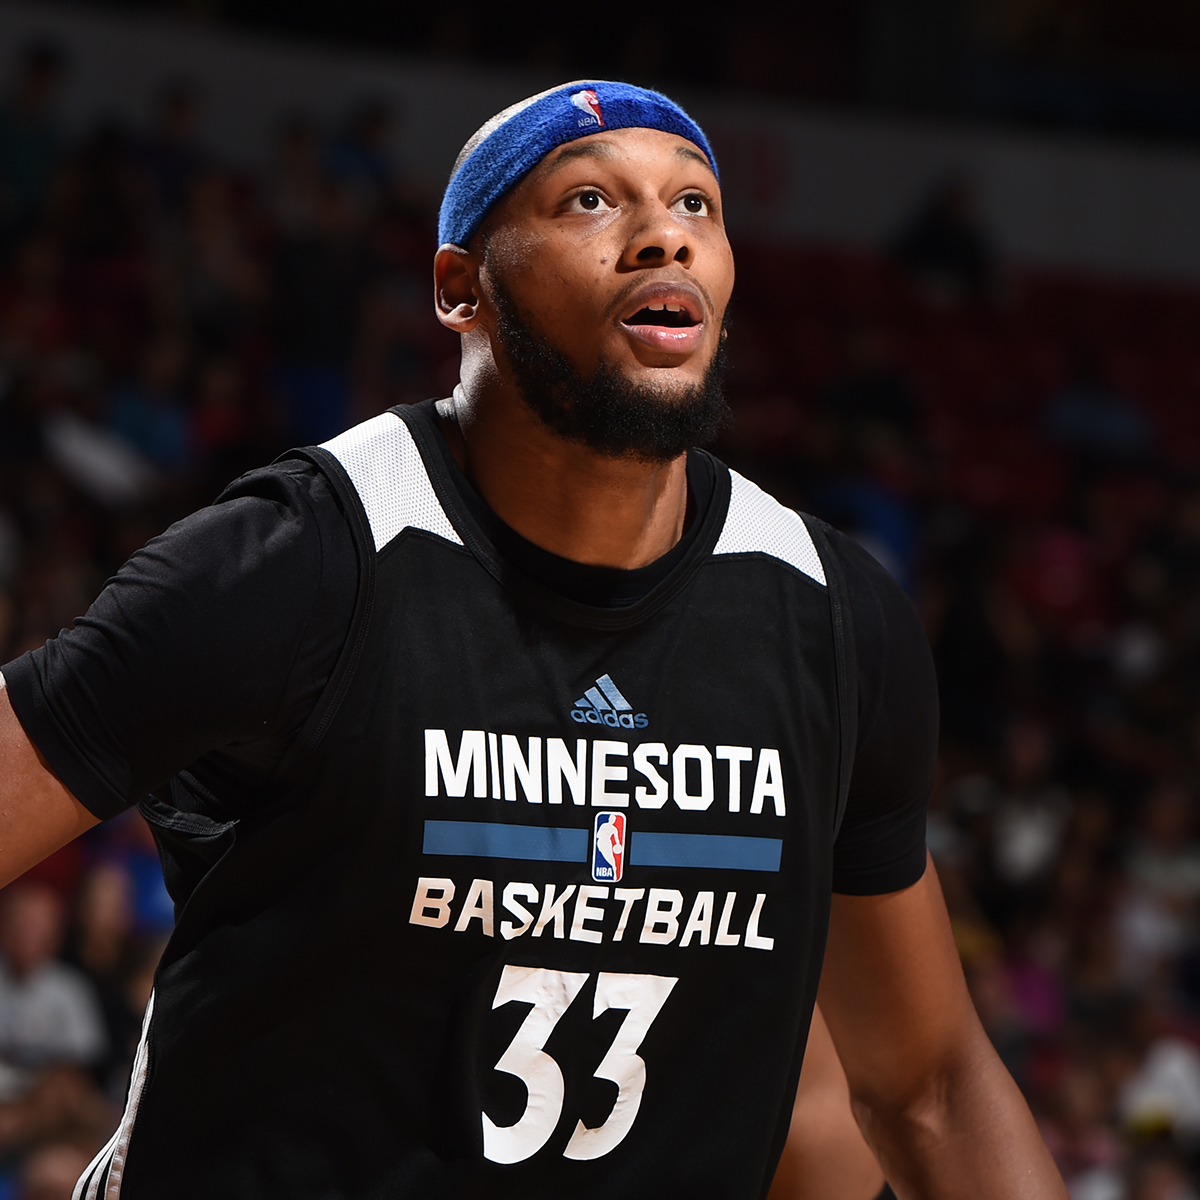 Former NBA Player Adreian Payne Dead at 31 After Fatal Shooting